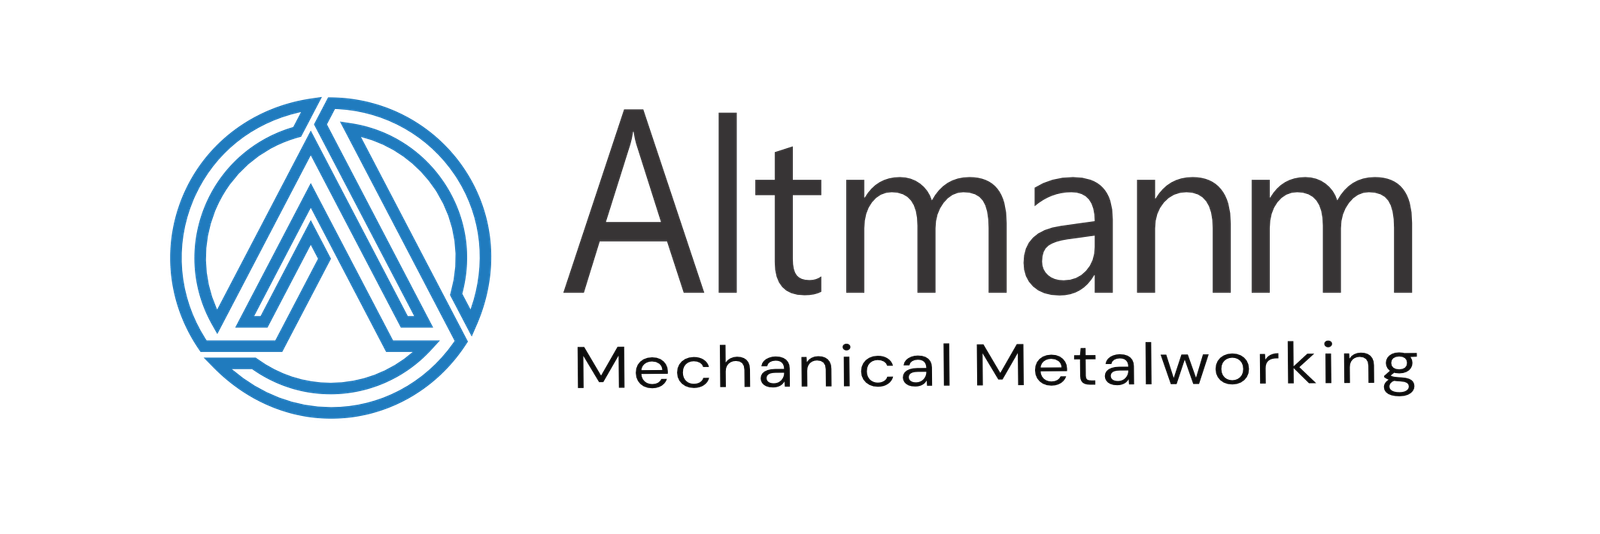 Altmanm – all types of metalworking